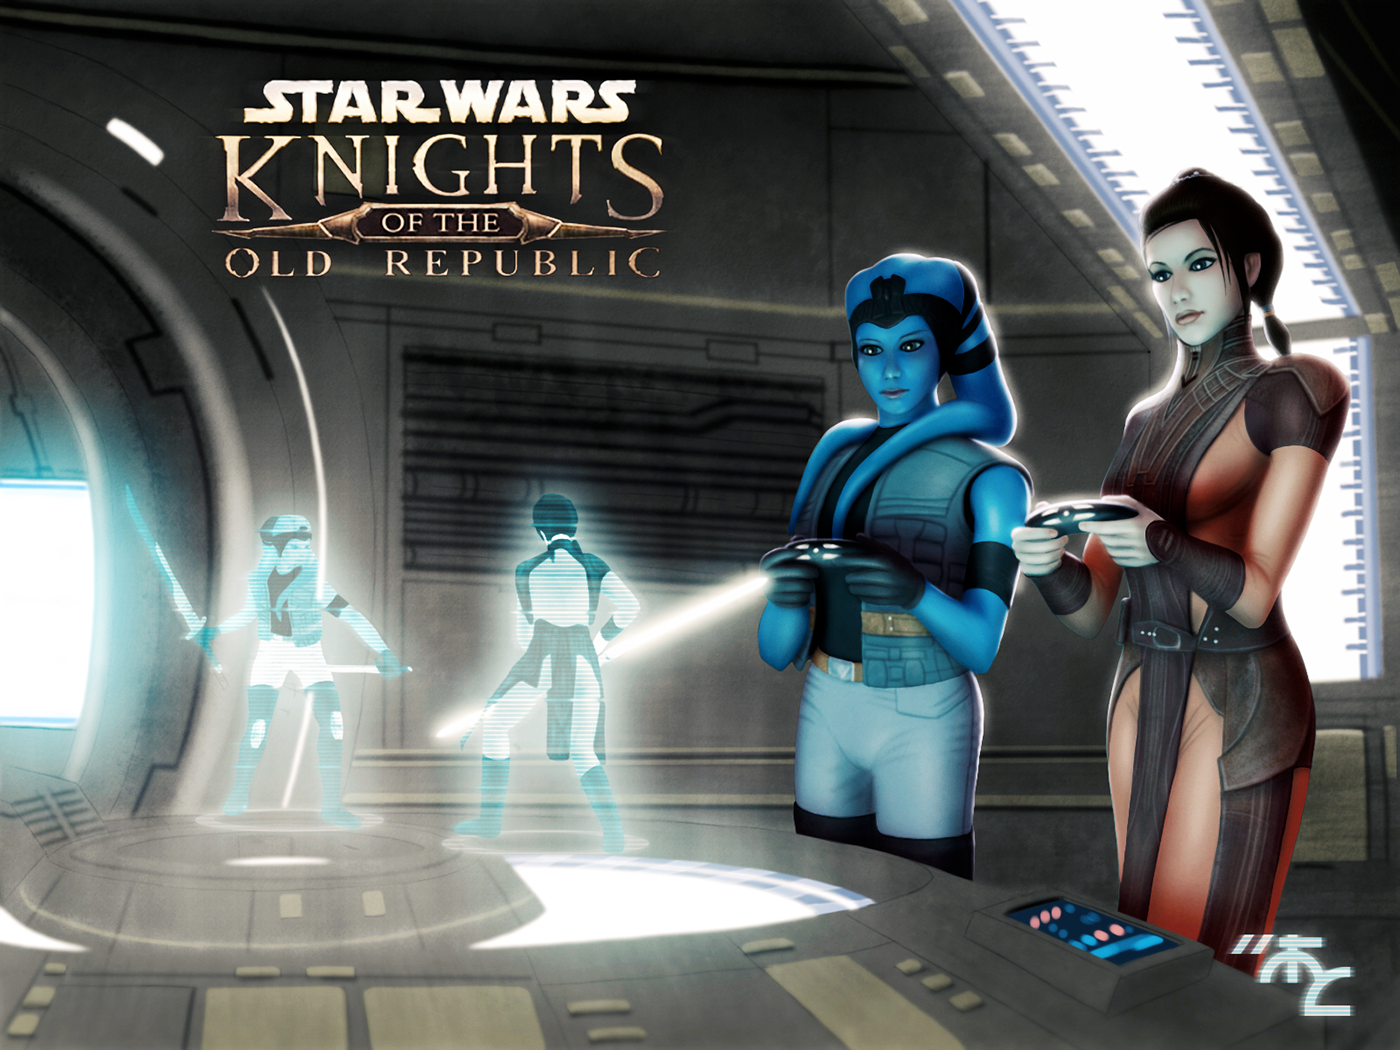 Star wars knights of the old republic русификатор для steam фото 68